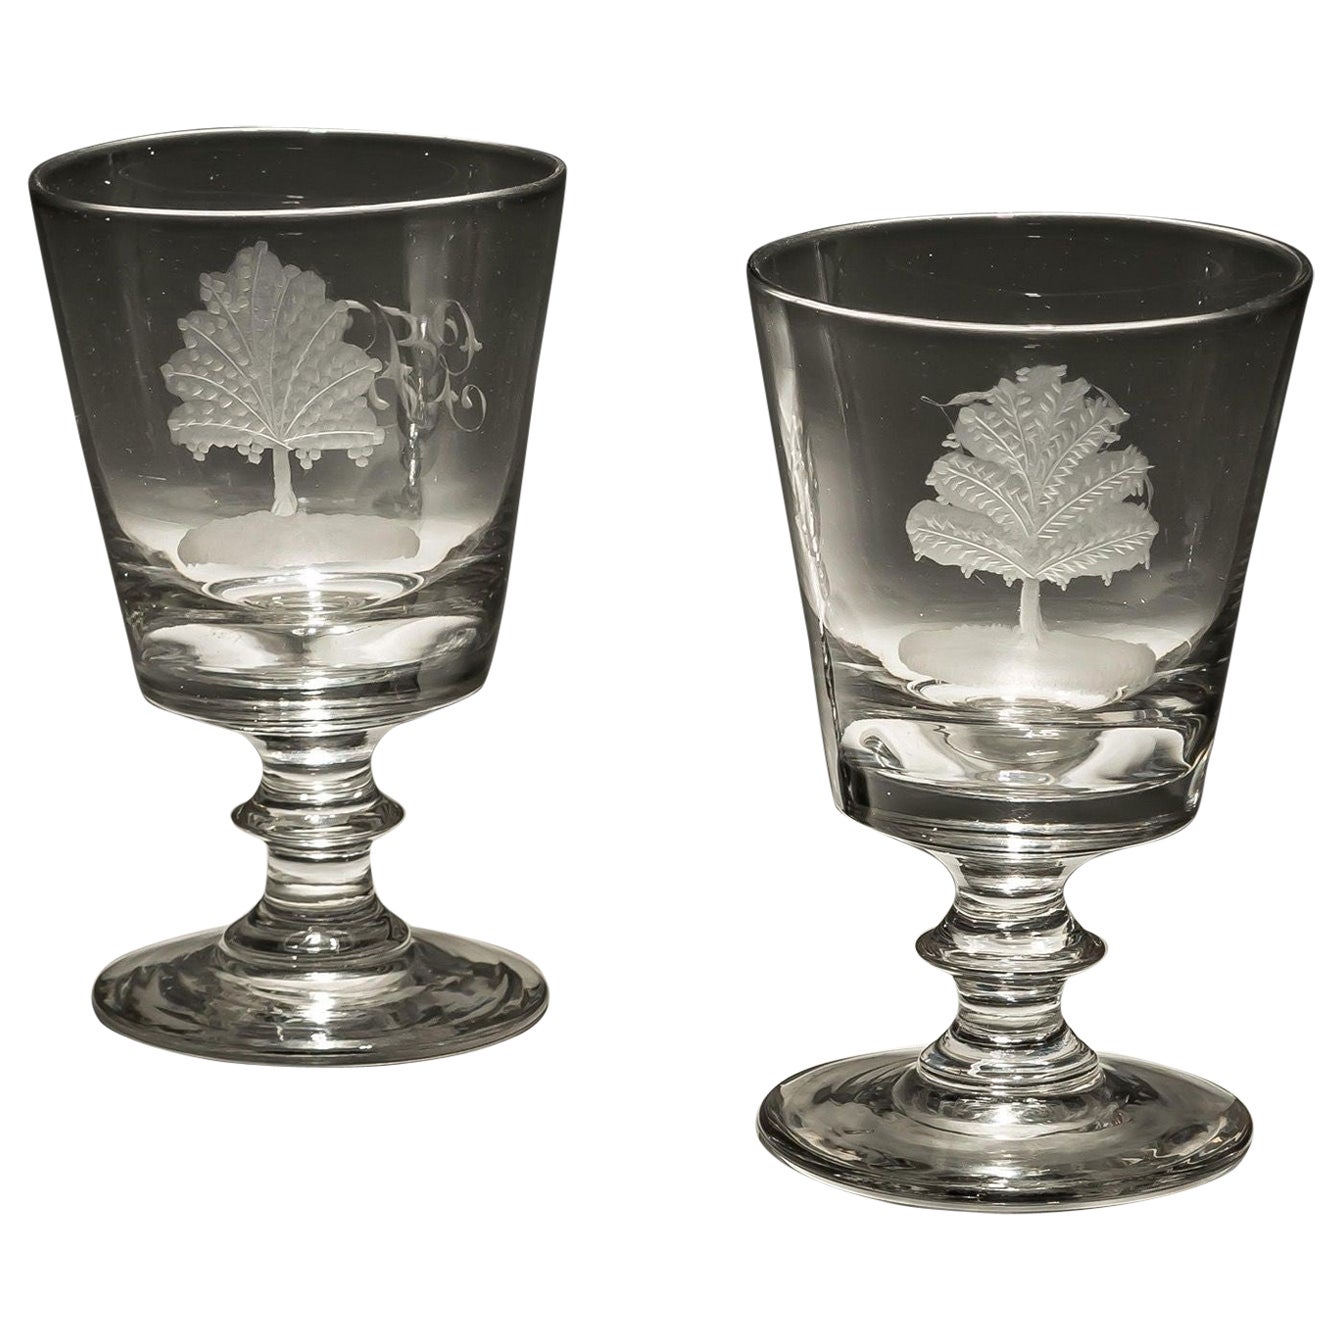 Fine Pair of Engraved Bucket Bowl Goblets